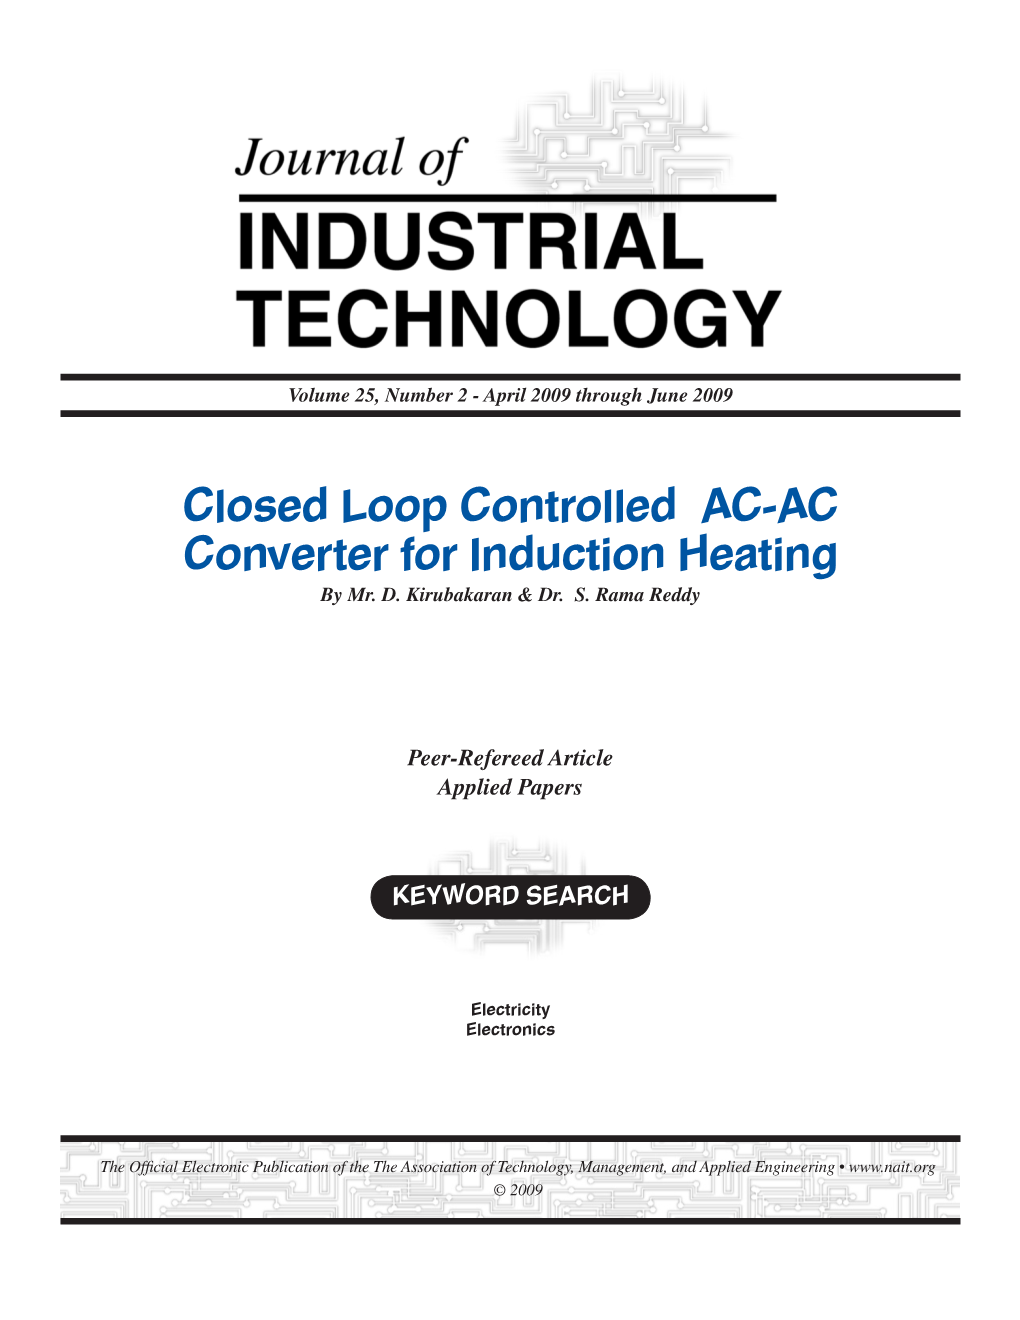 Closed Loop Controlled AC-AC Converter for Induction Heating by Mr